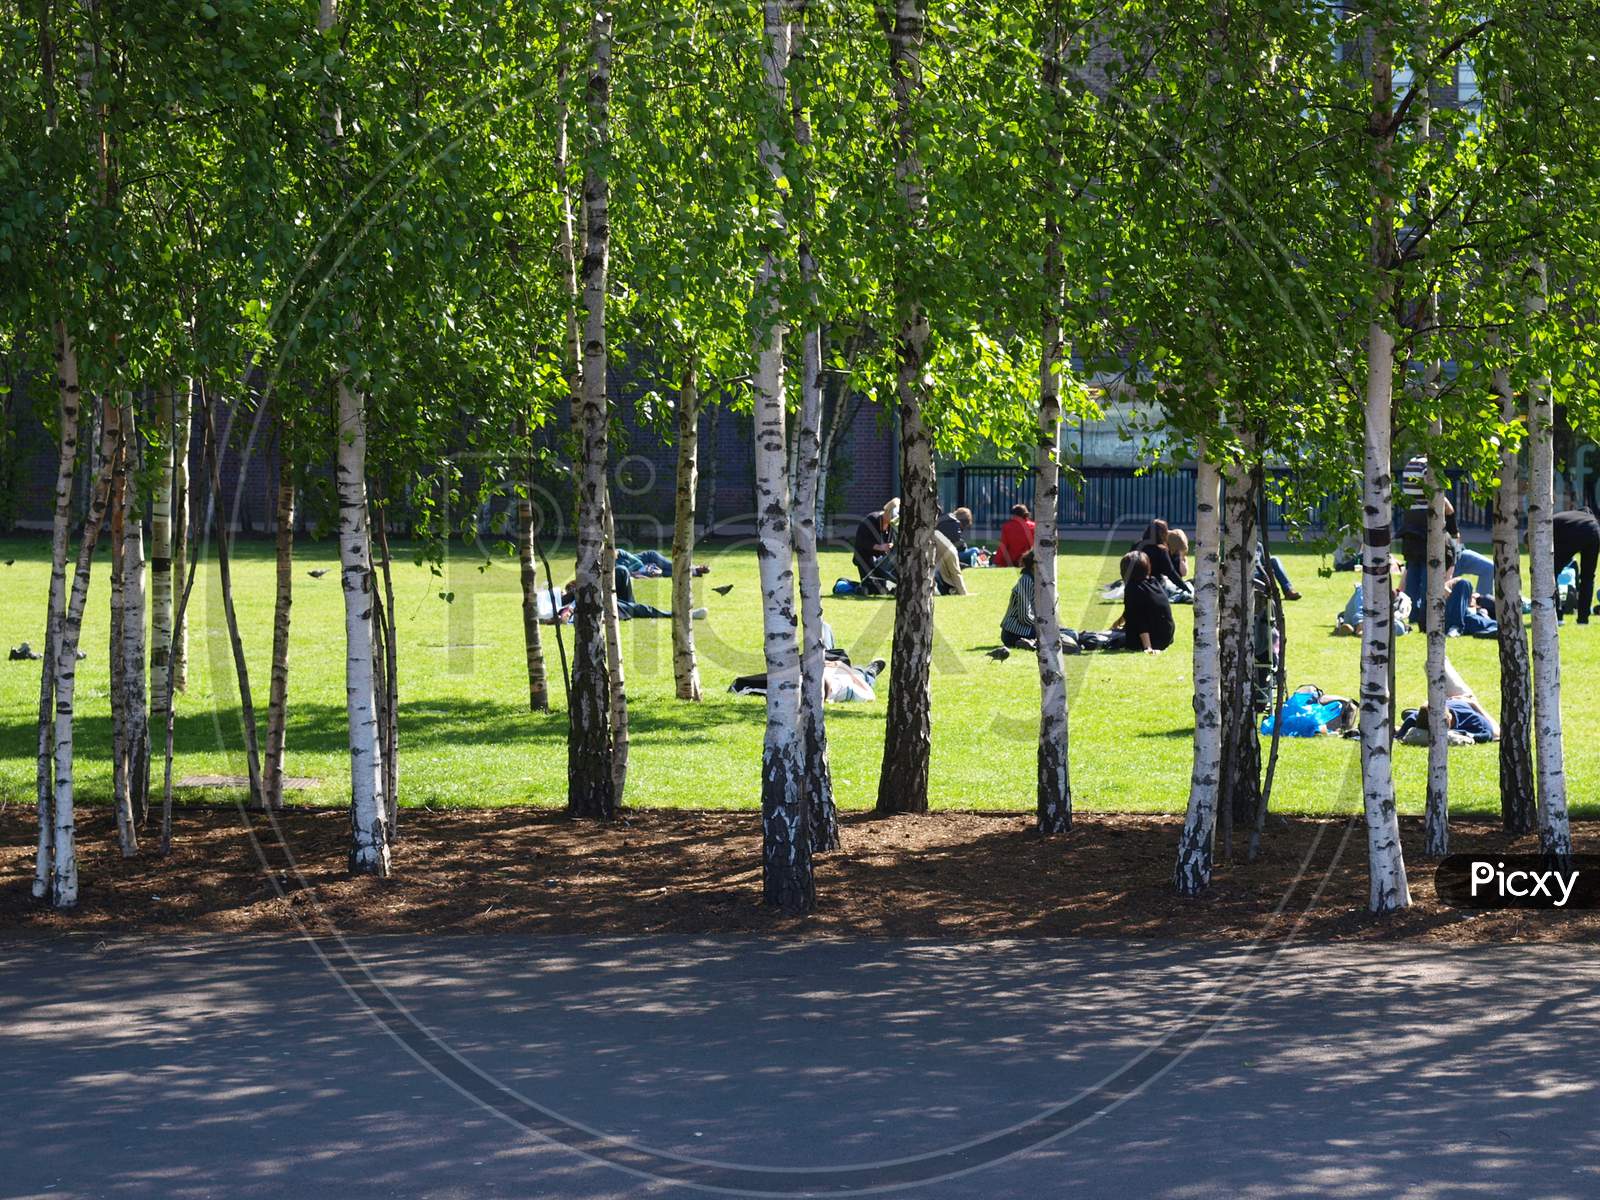 Birch Trees In The Park